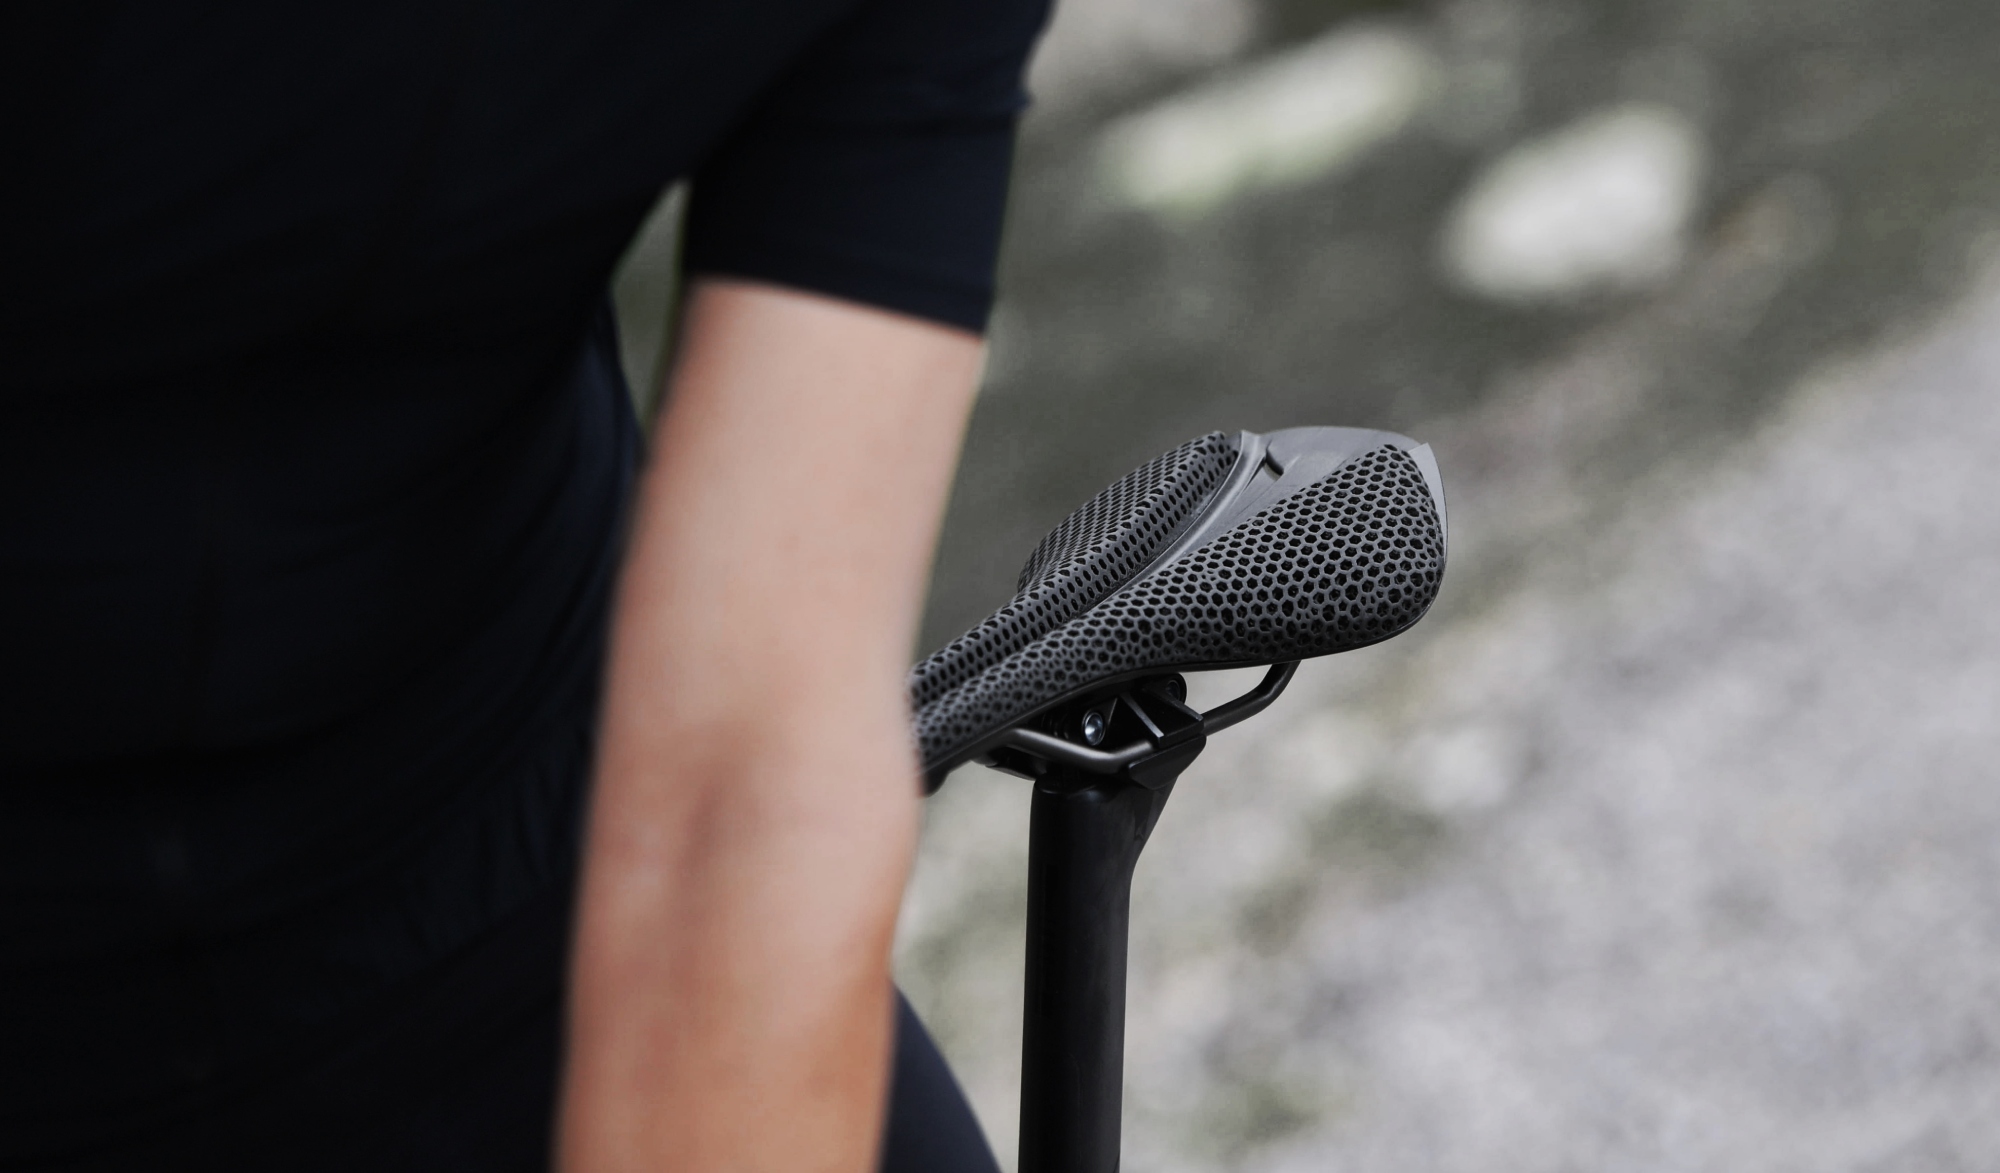 Fizik unveils two new saddles in its 3D-printed Adaptive line